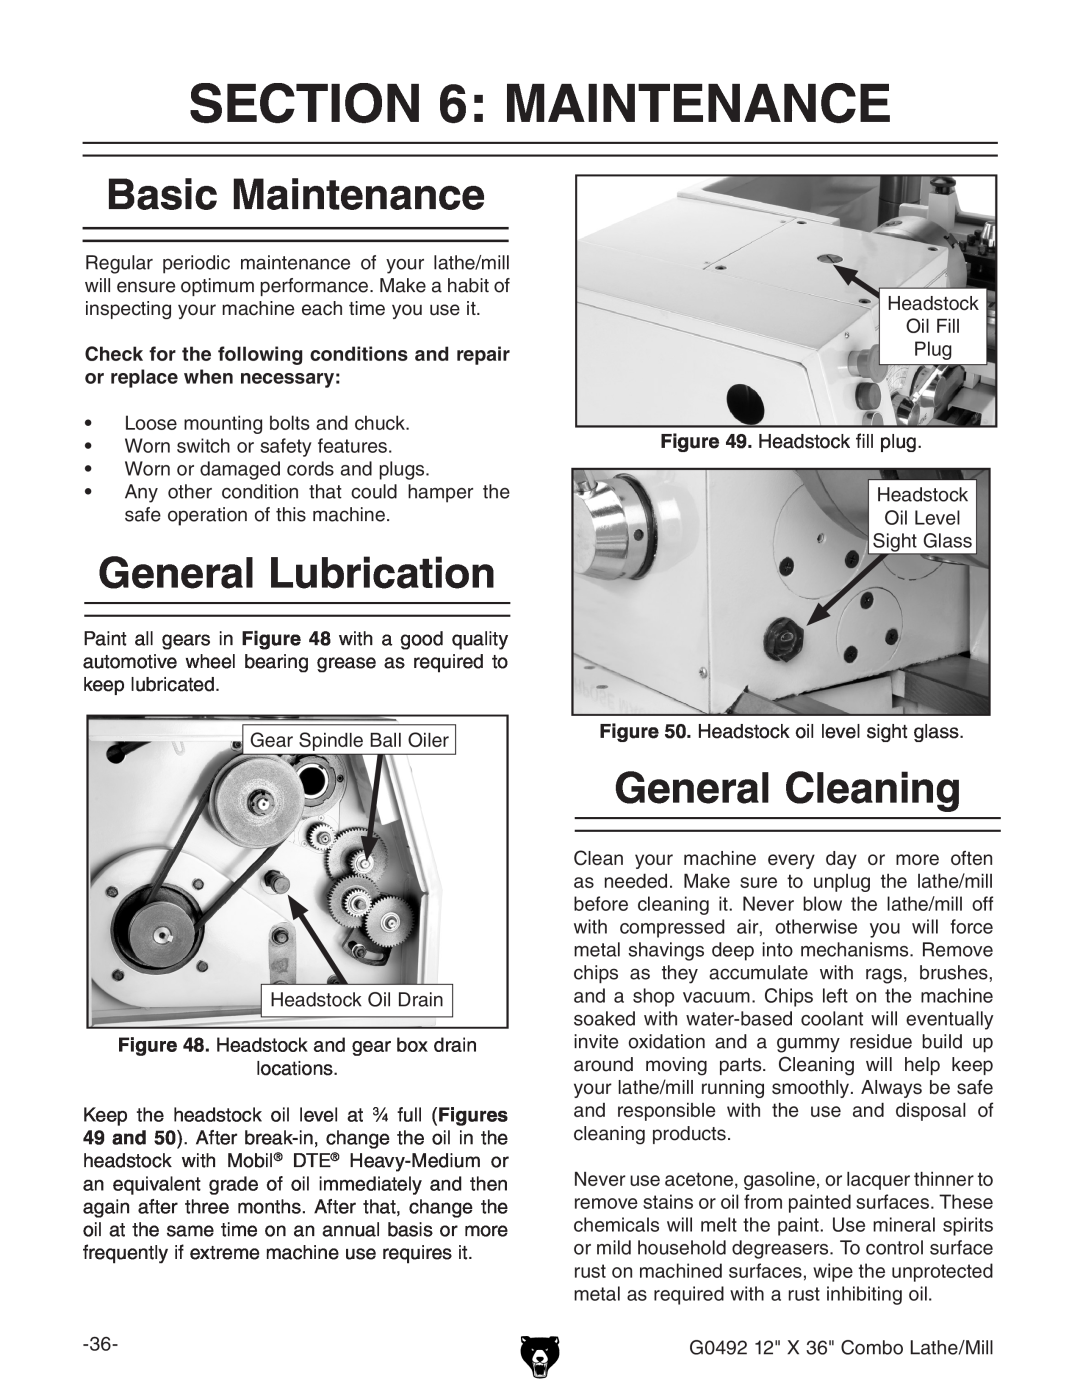 Grizzly G0492 owner manual Basic Maintenance, General Lubrication, General Cleaning 